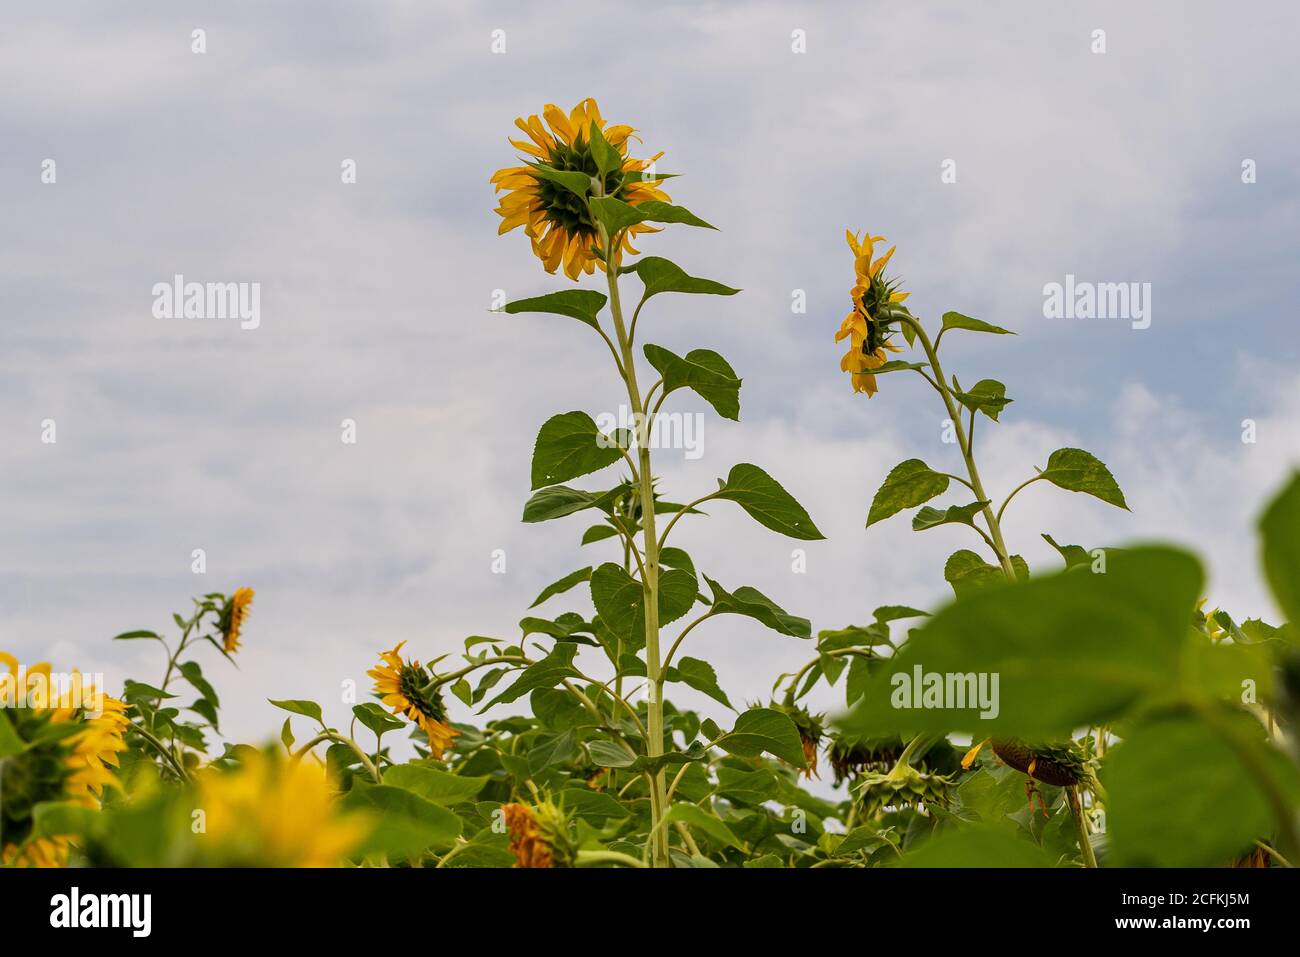 two yellow sunflower flowers have grown taller than the other flowers around, staring at the clouds in the blue sky Stock Photo